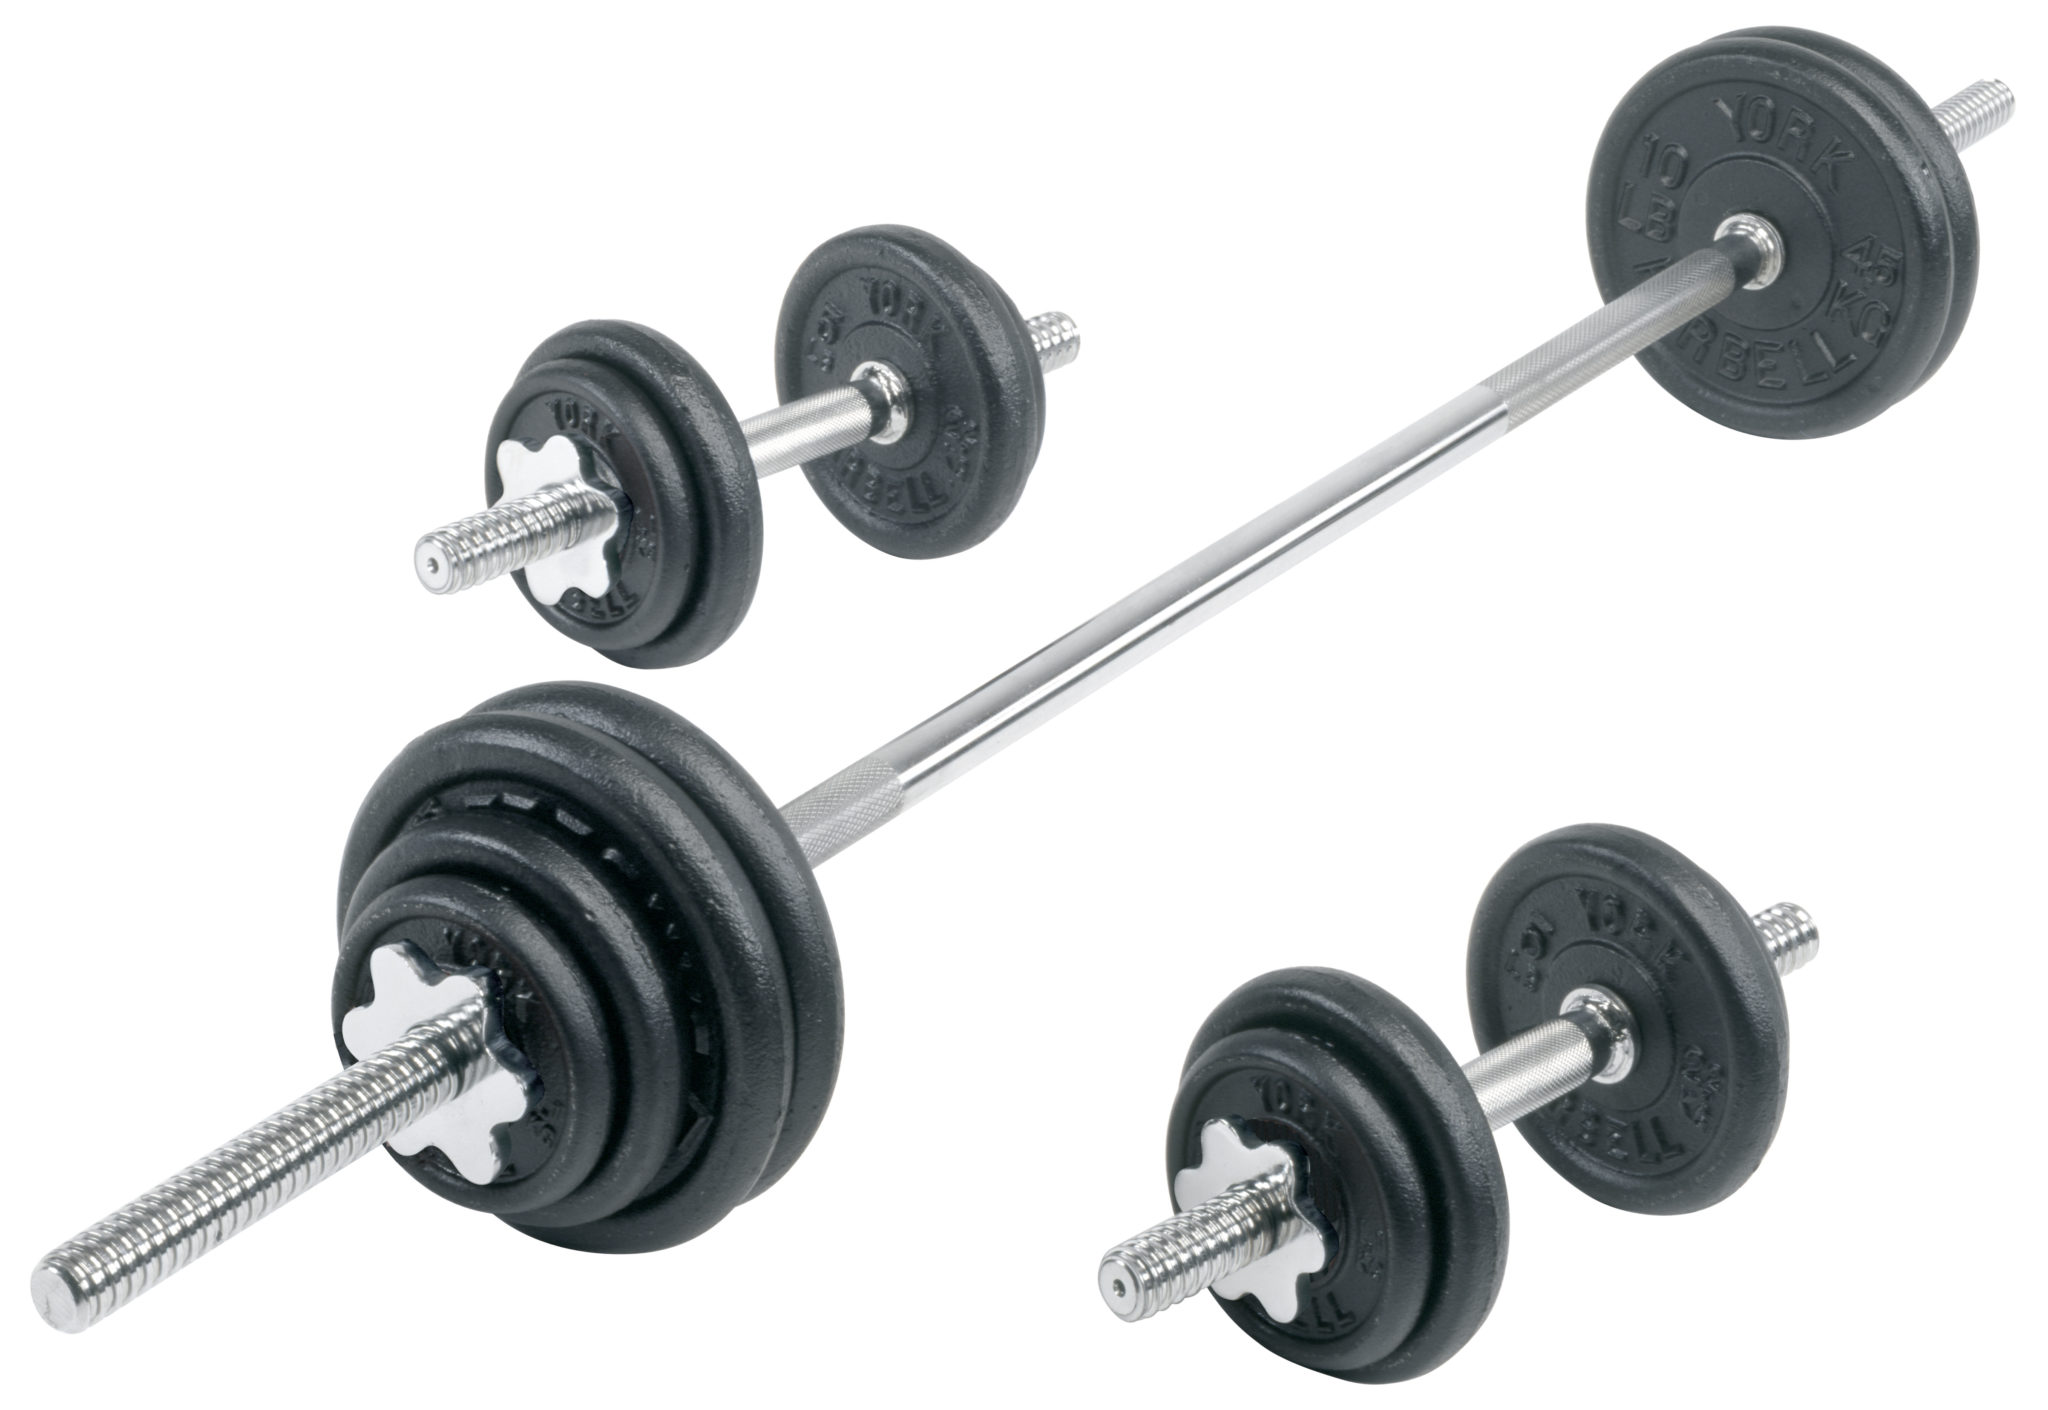 York 14” Spinlock Dumbbell Bar Weight Lifting Training Handle with Collars 